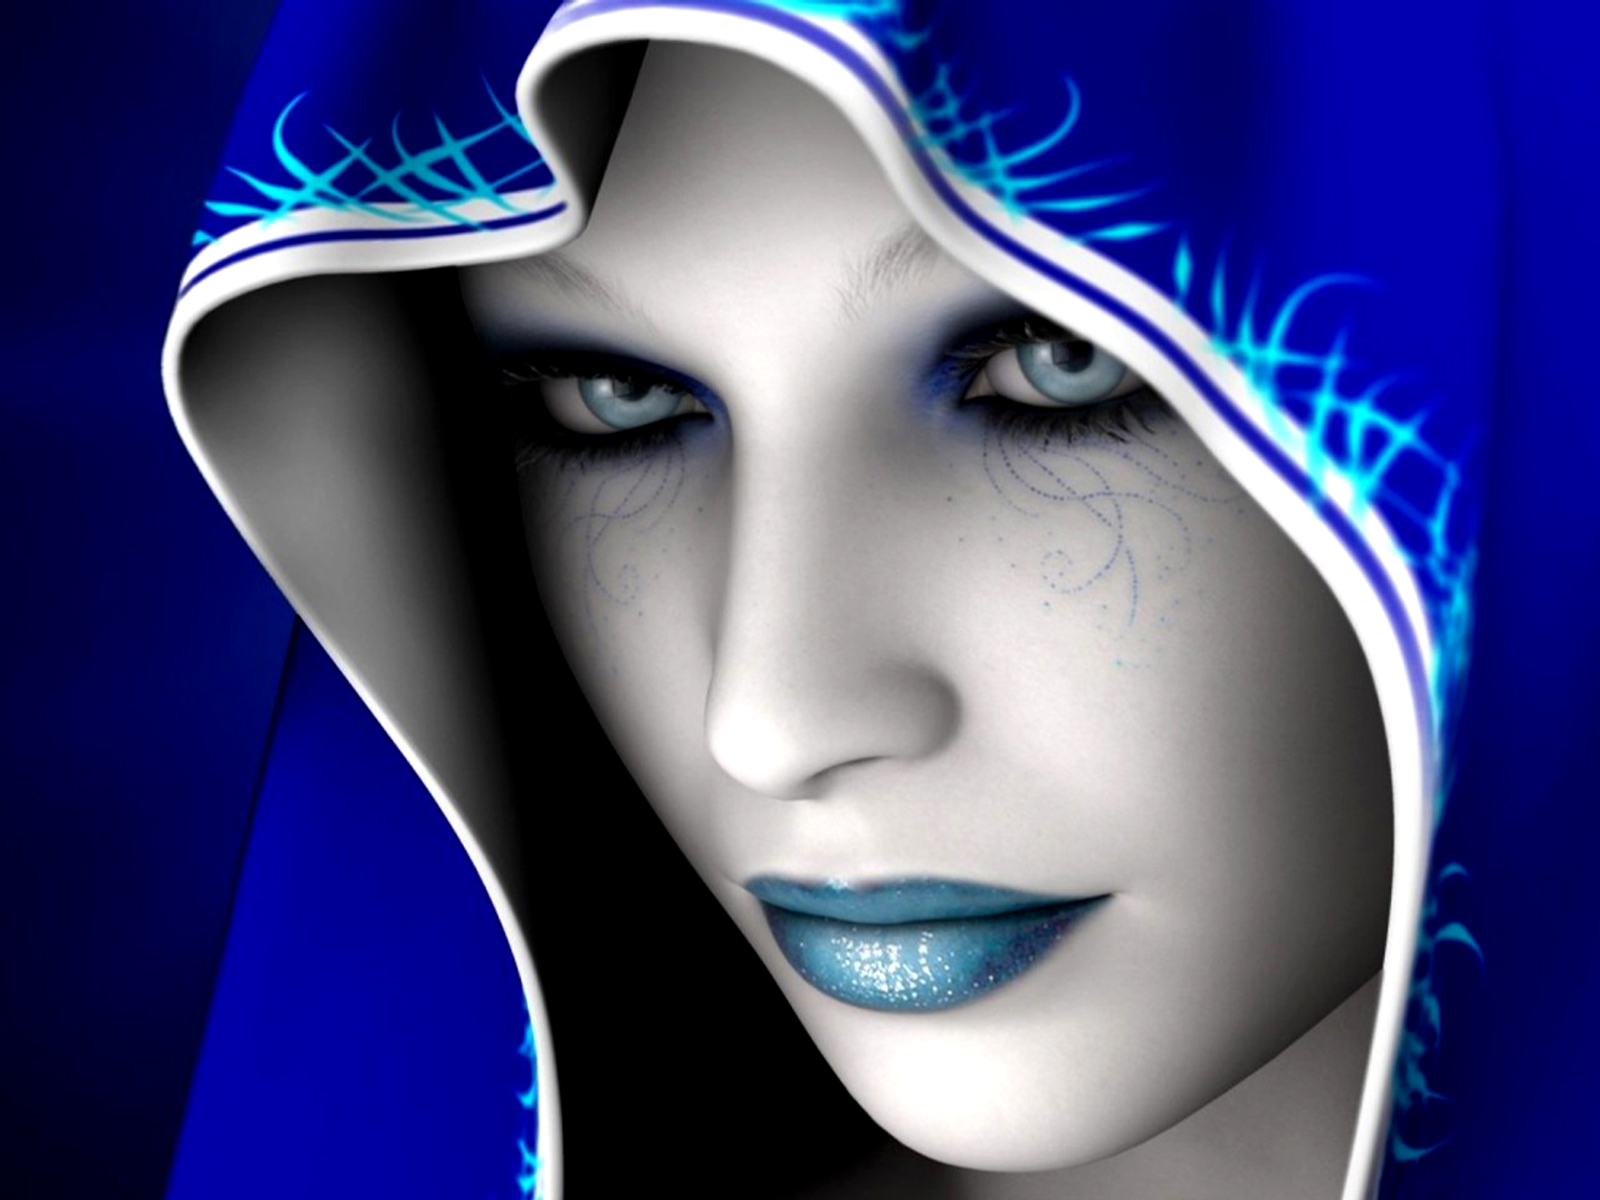 Fantasy-inspired wallpaper featuring women in a blue mood.